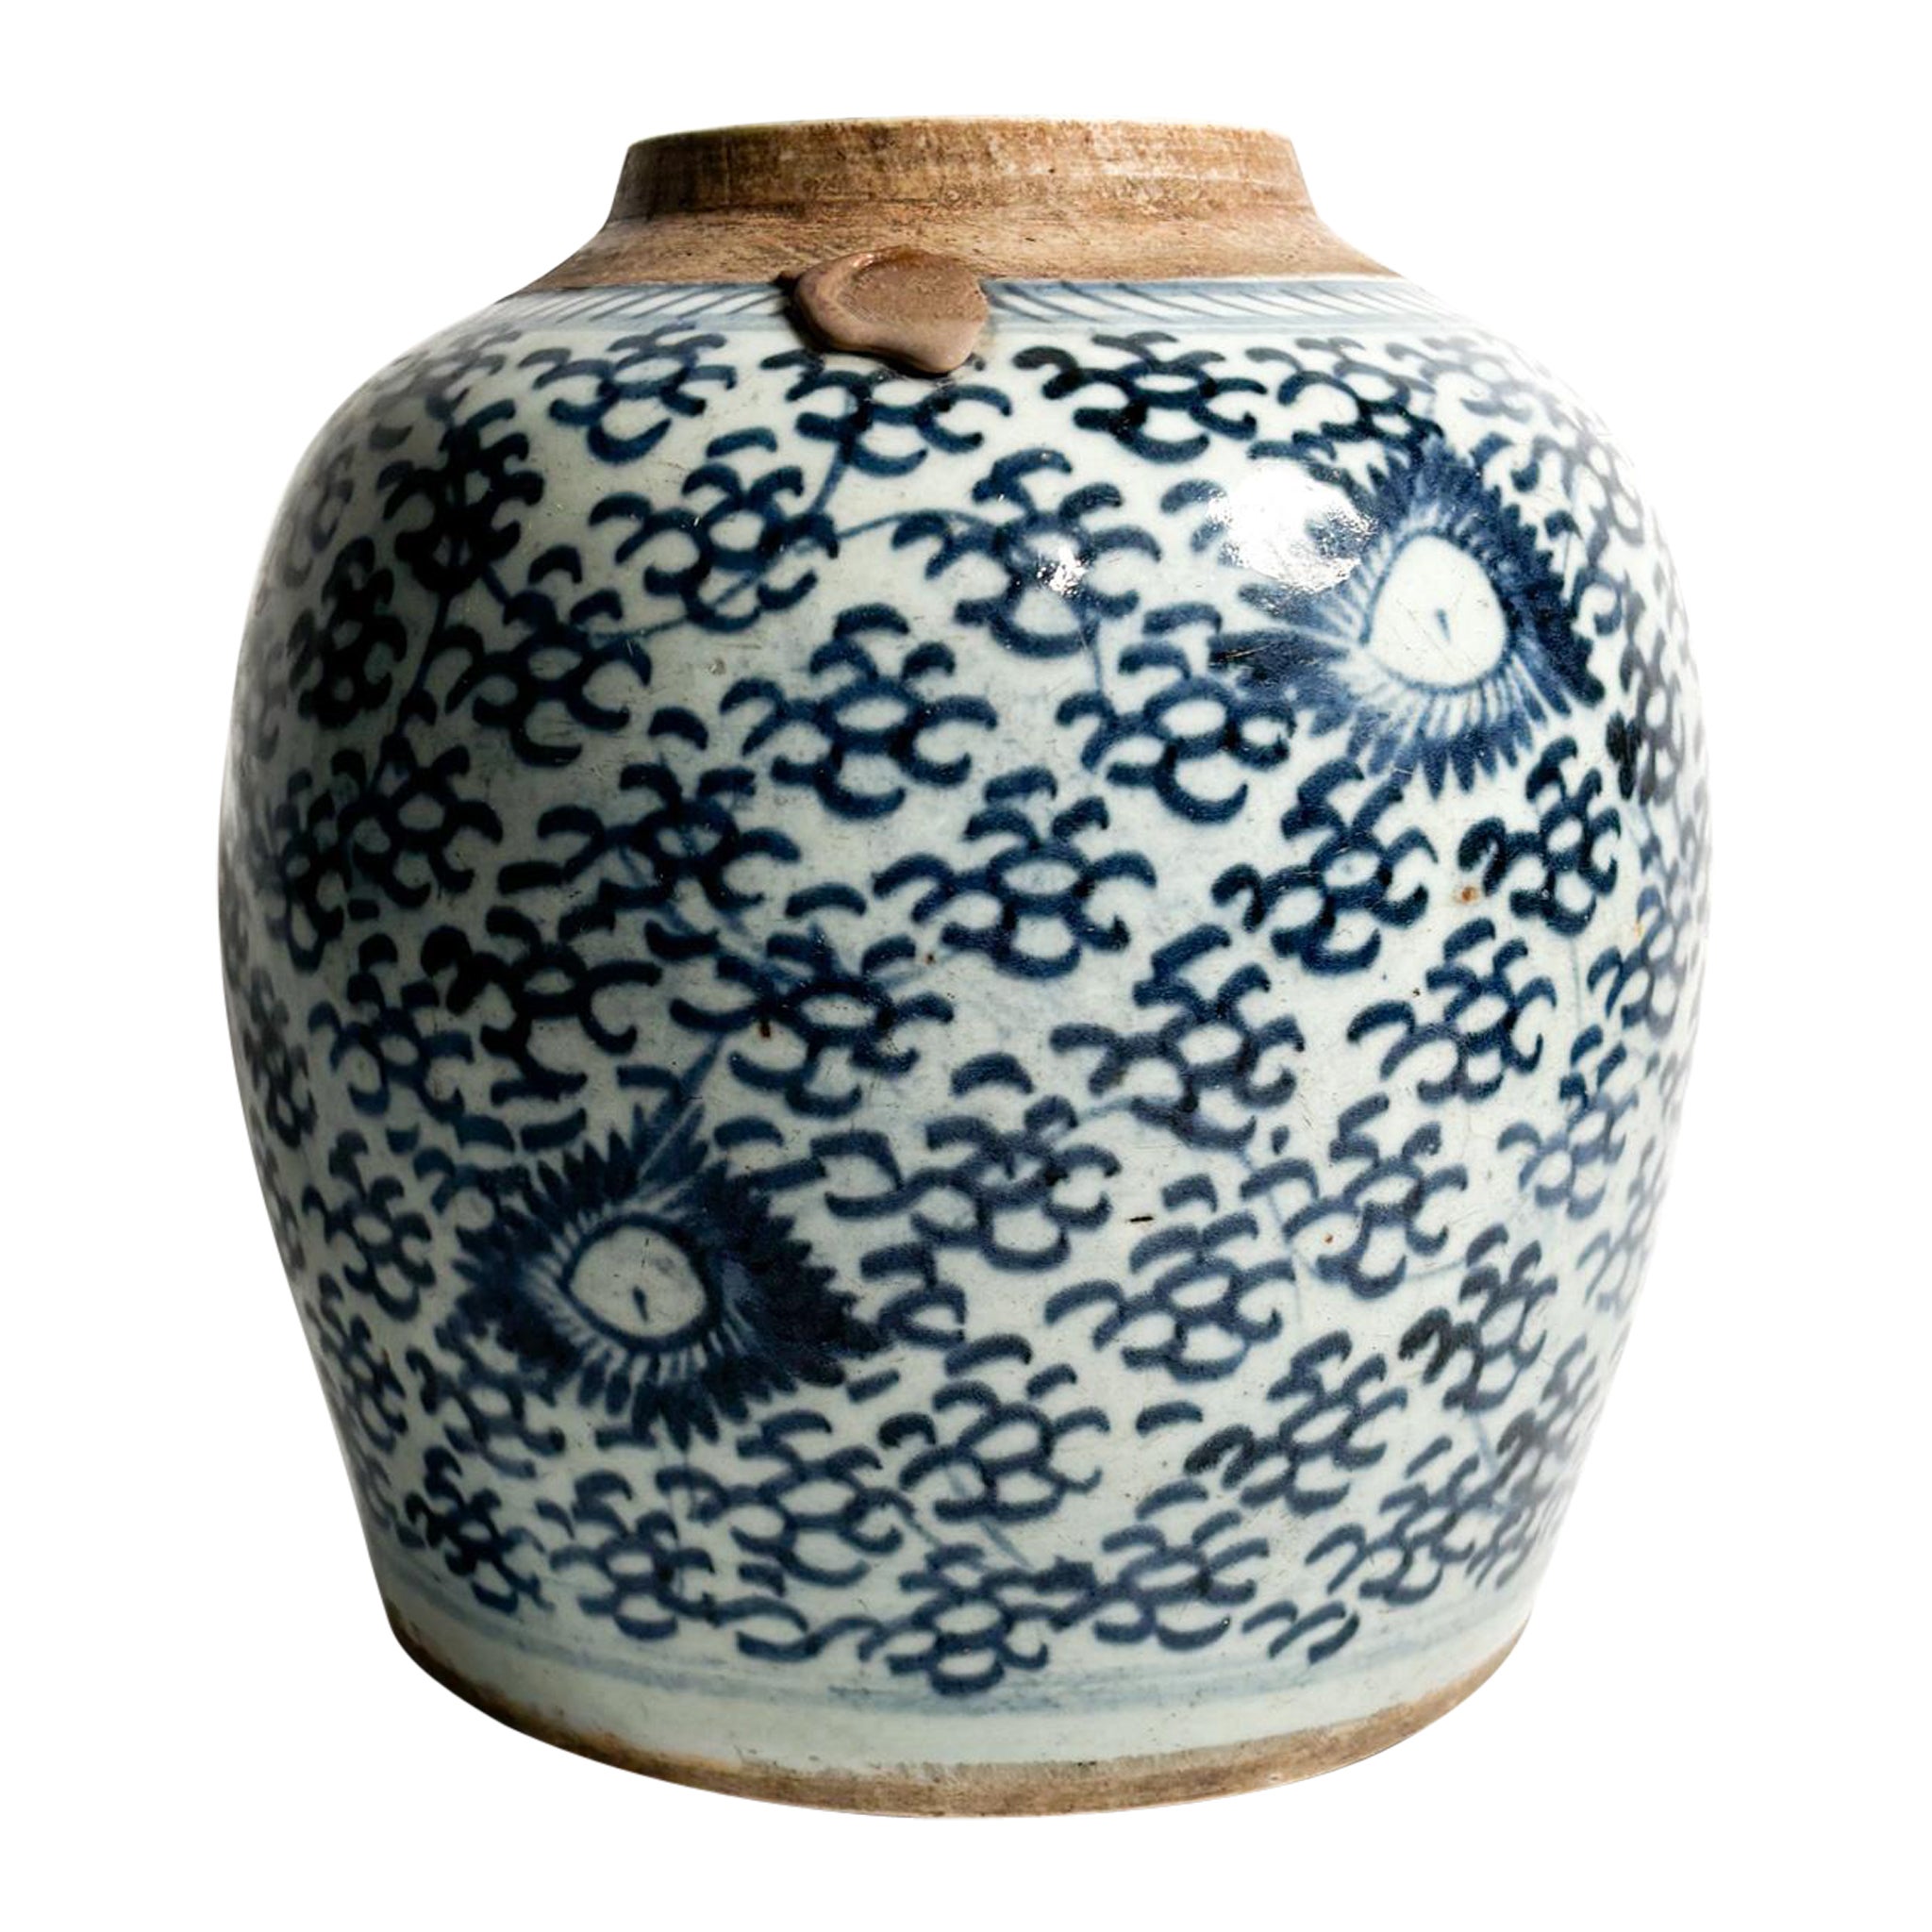 Chinese Ceramic Vase with Blue China Decorations from the 1950s